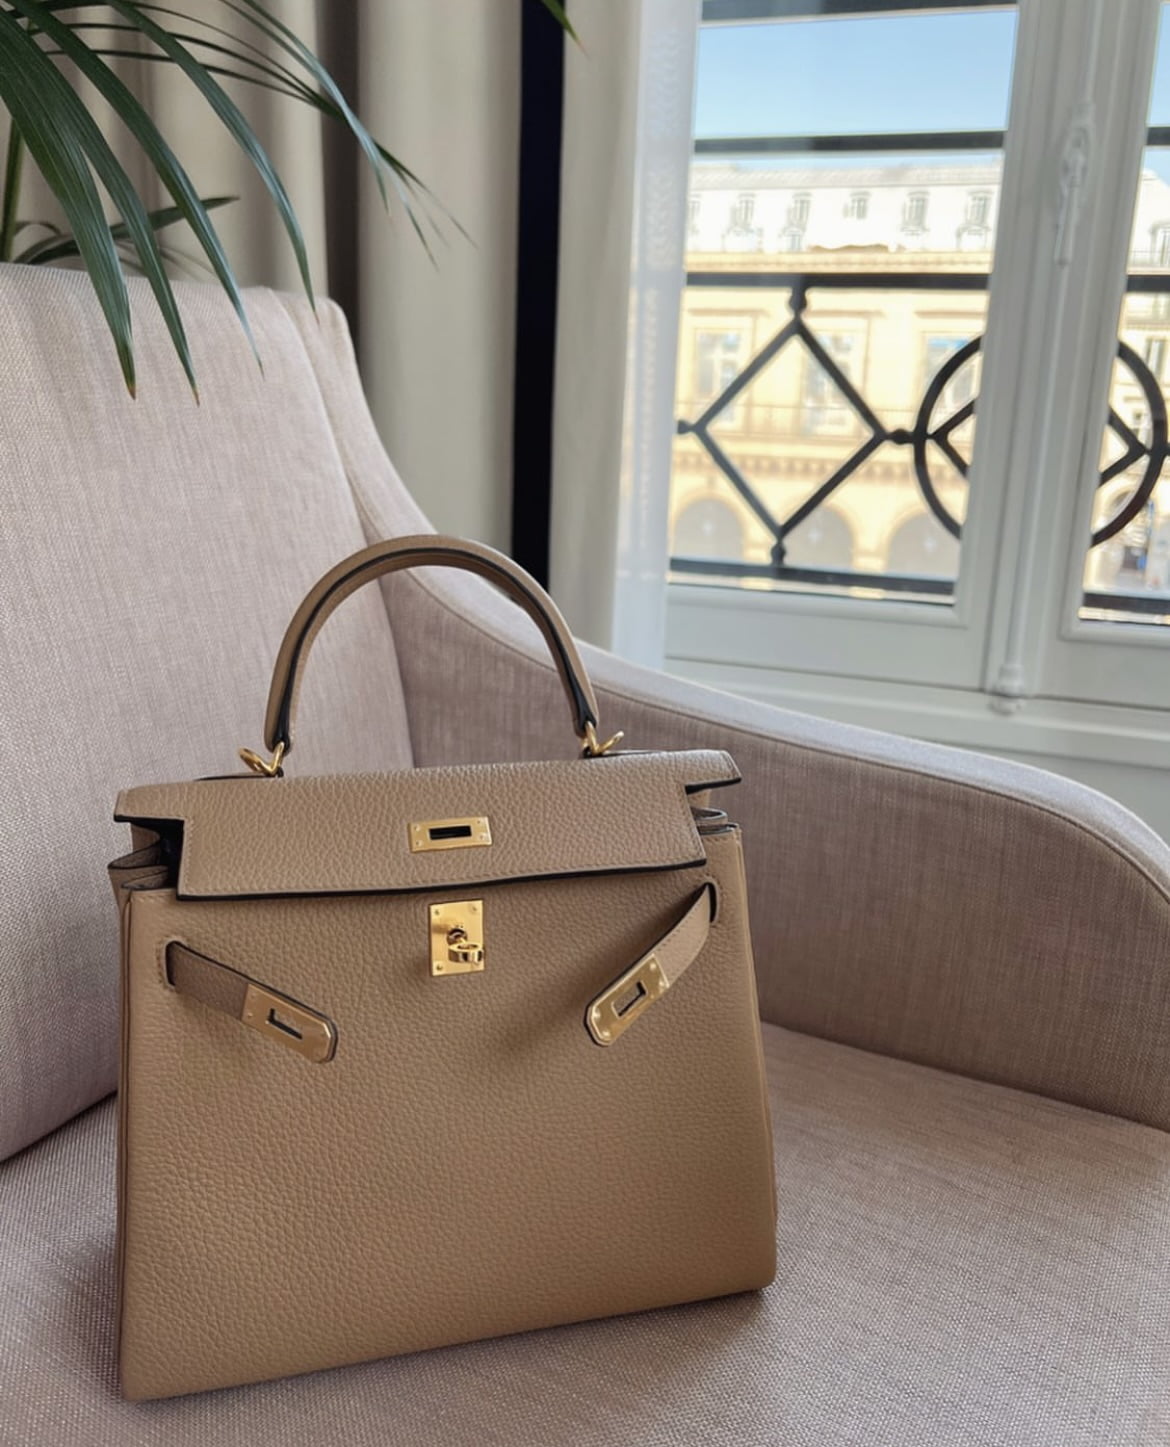 My Hermes Experience - Trying To Get a Birkin or Kelly in New York